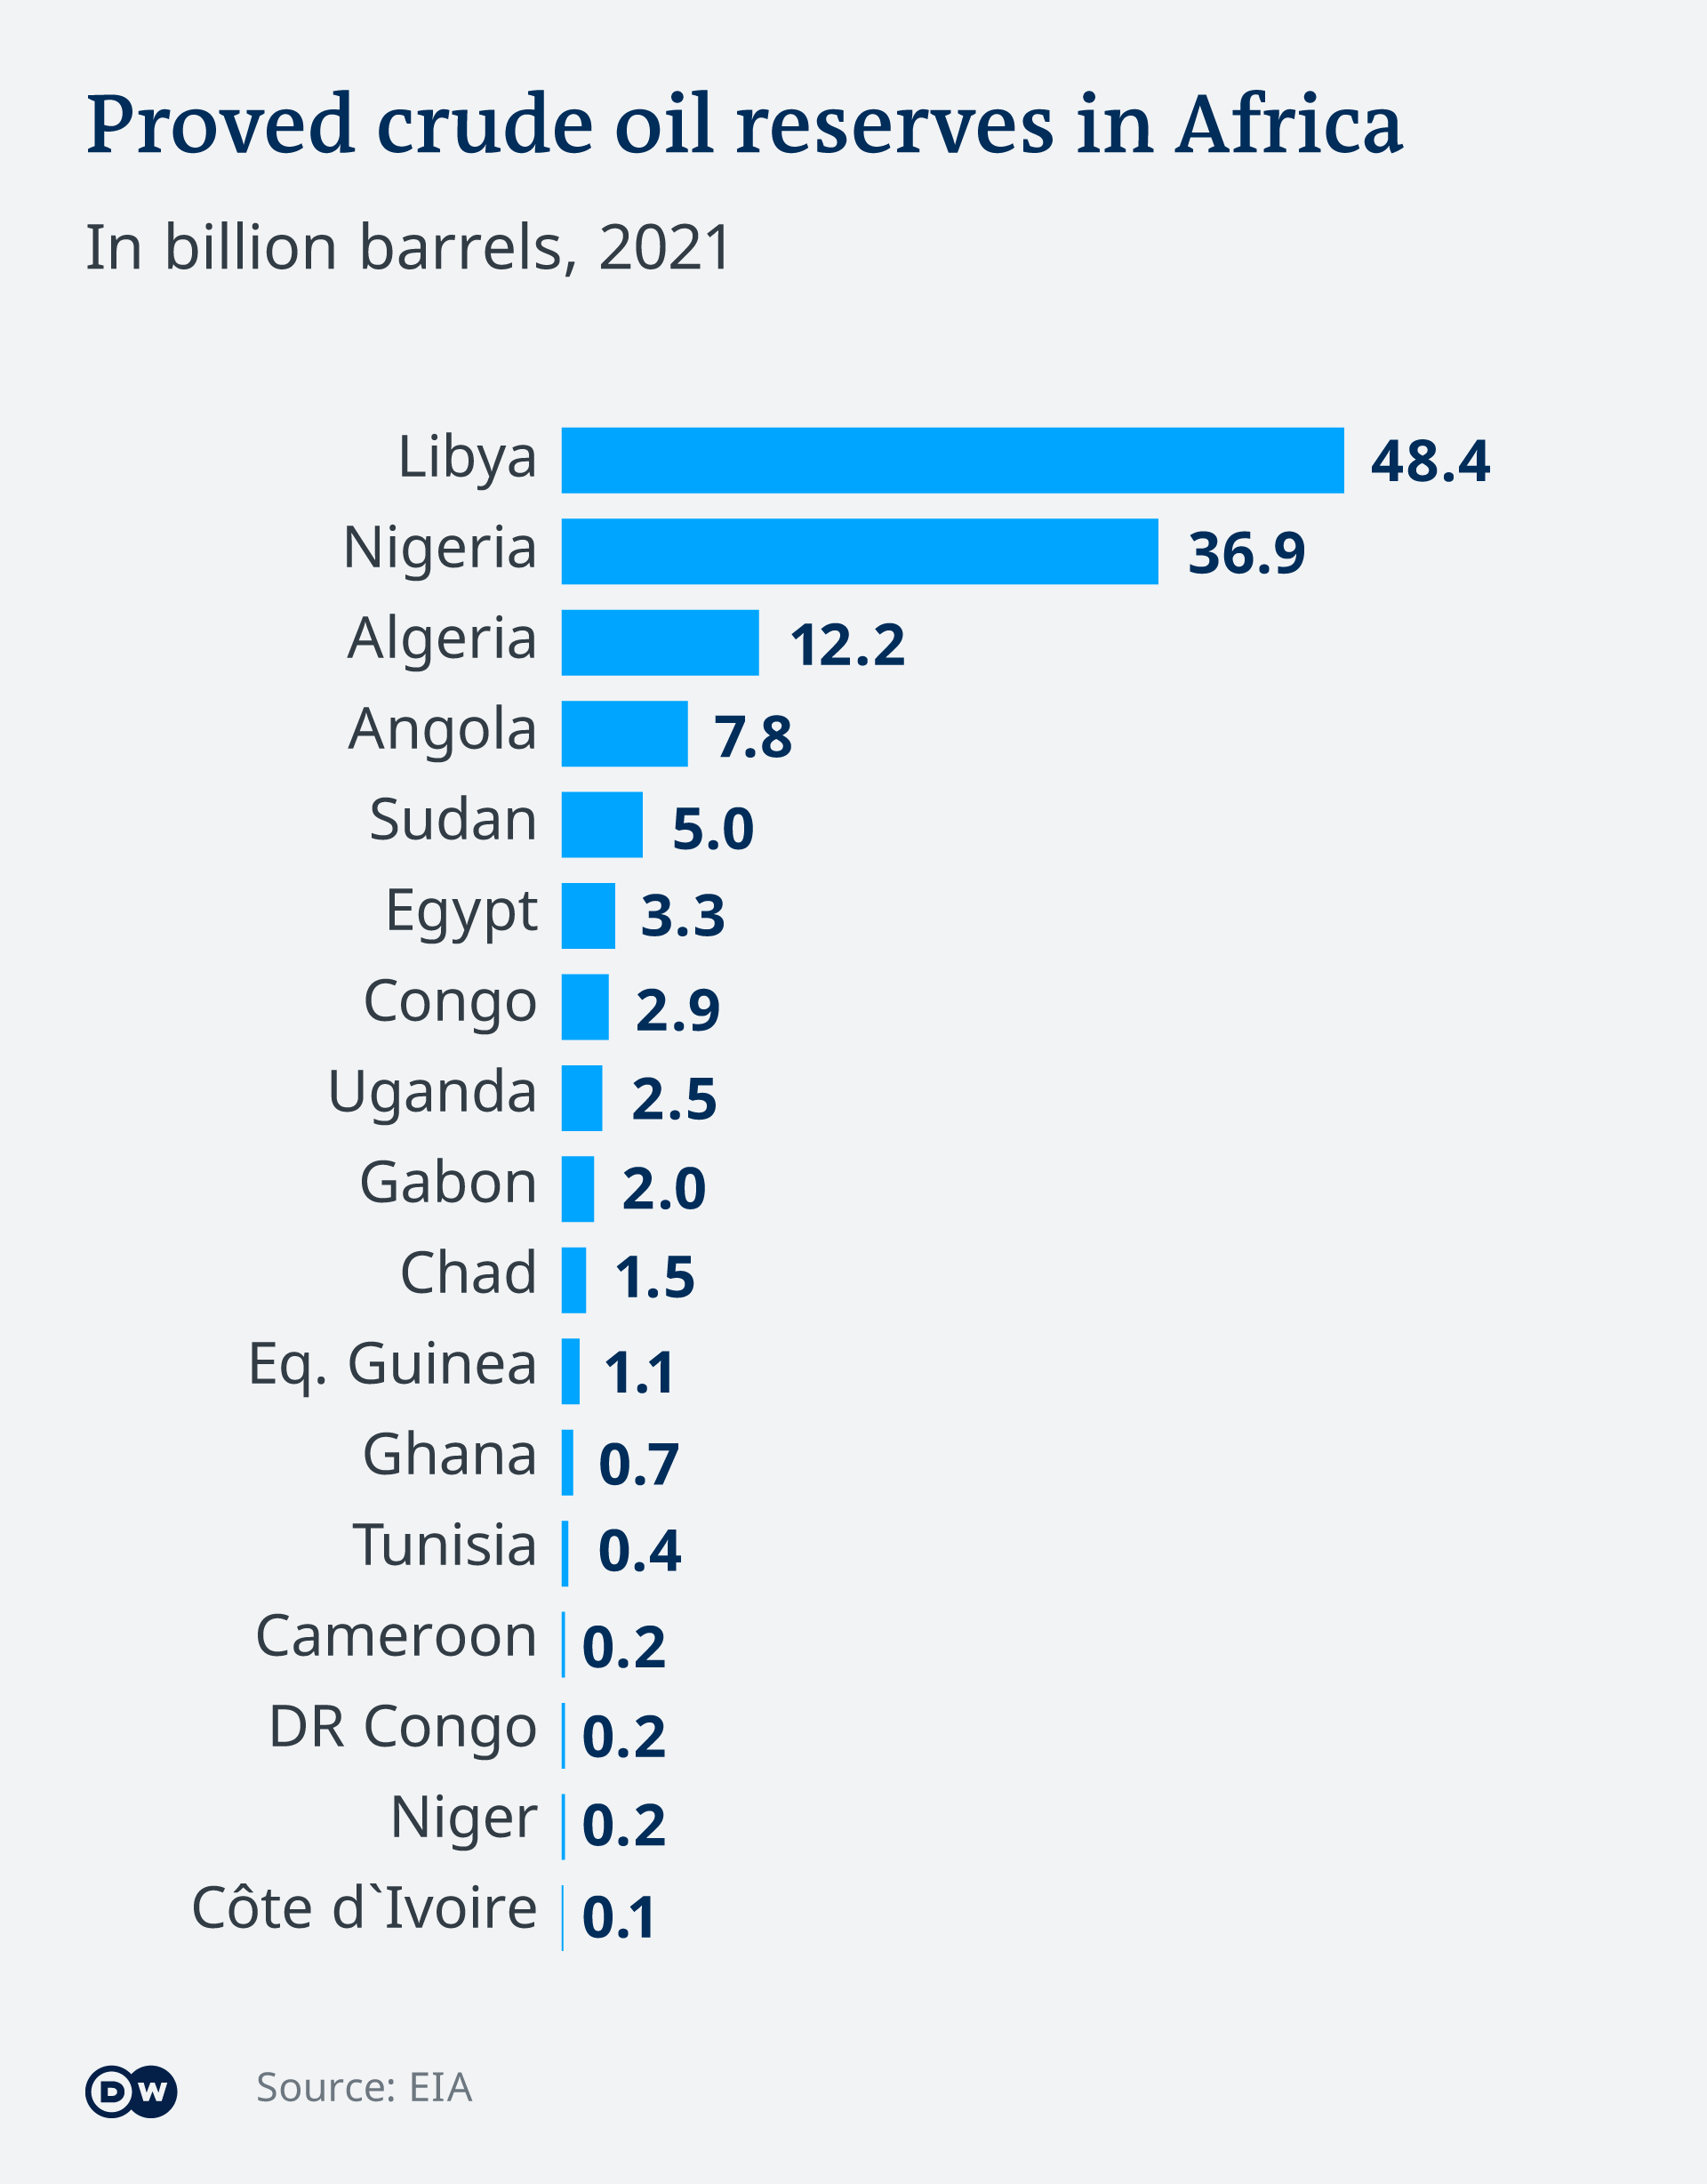 A graph of oil reserves by country